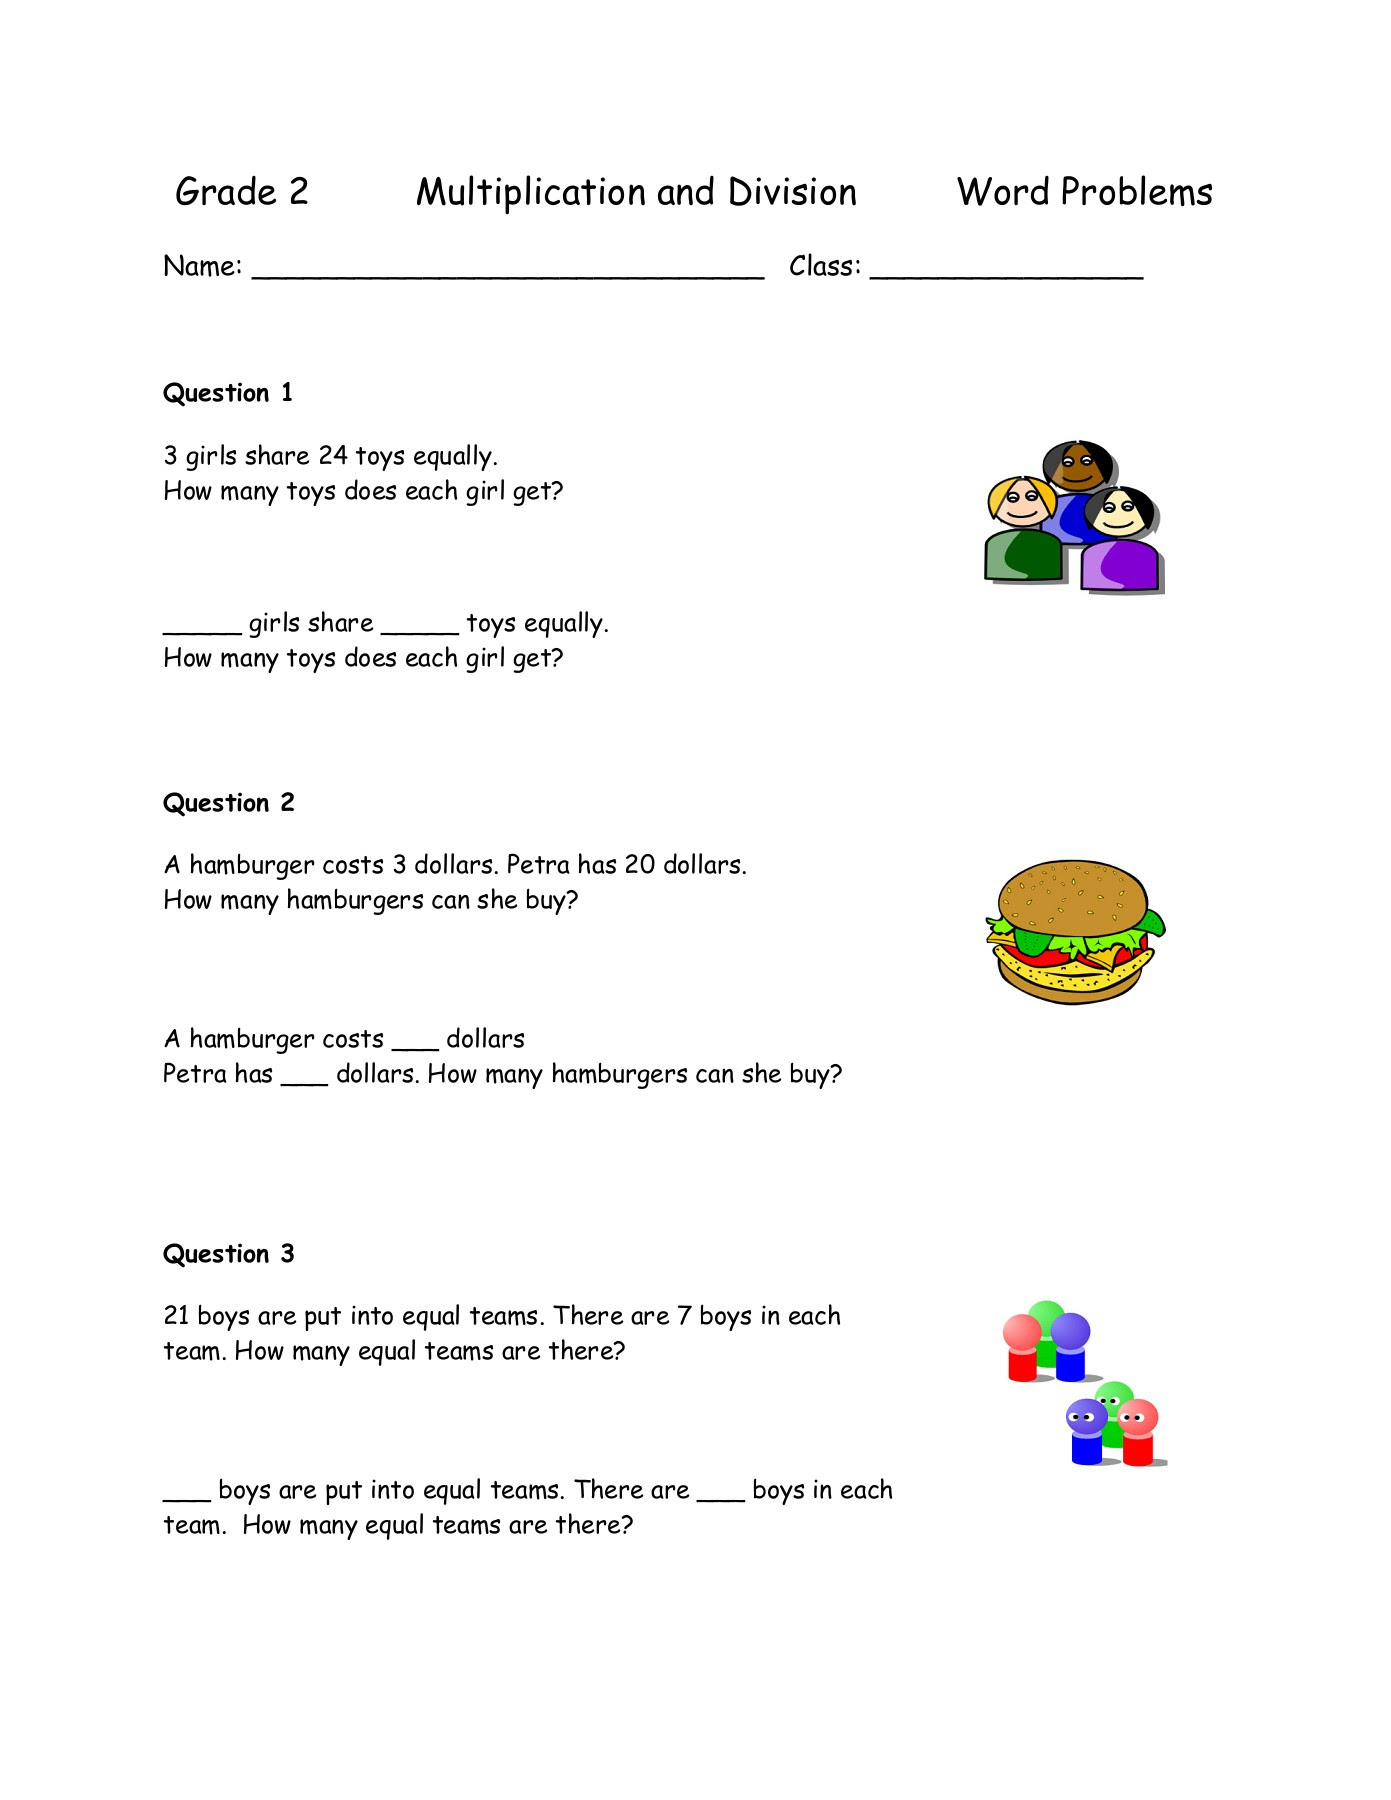 Word Problems Involving Multiplication And Division Worksheets